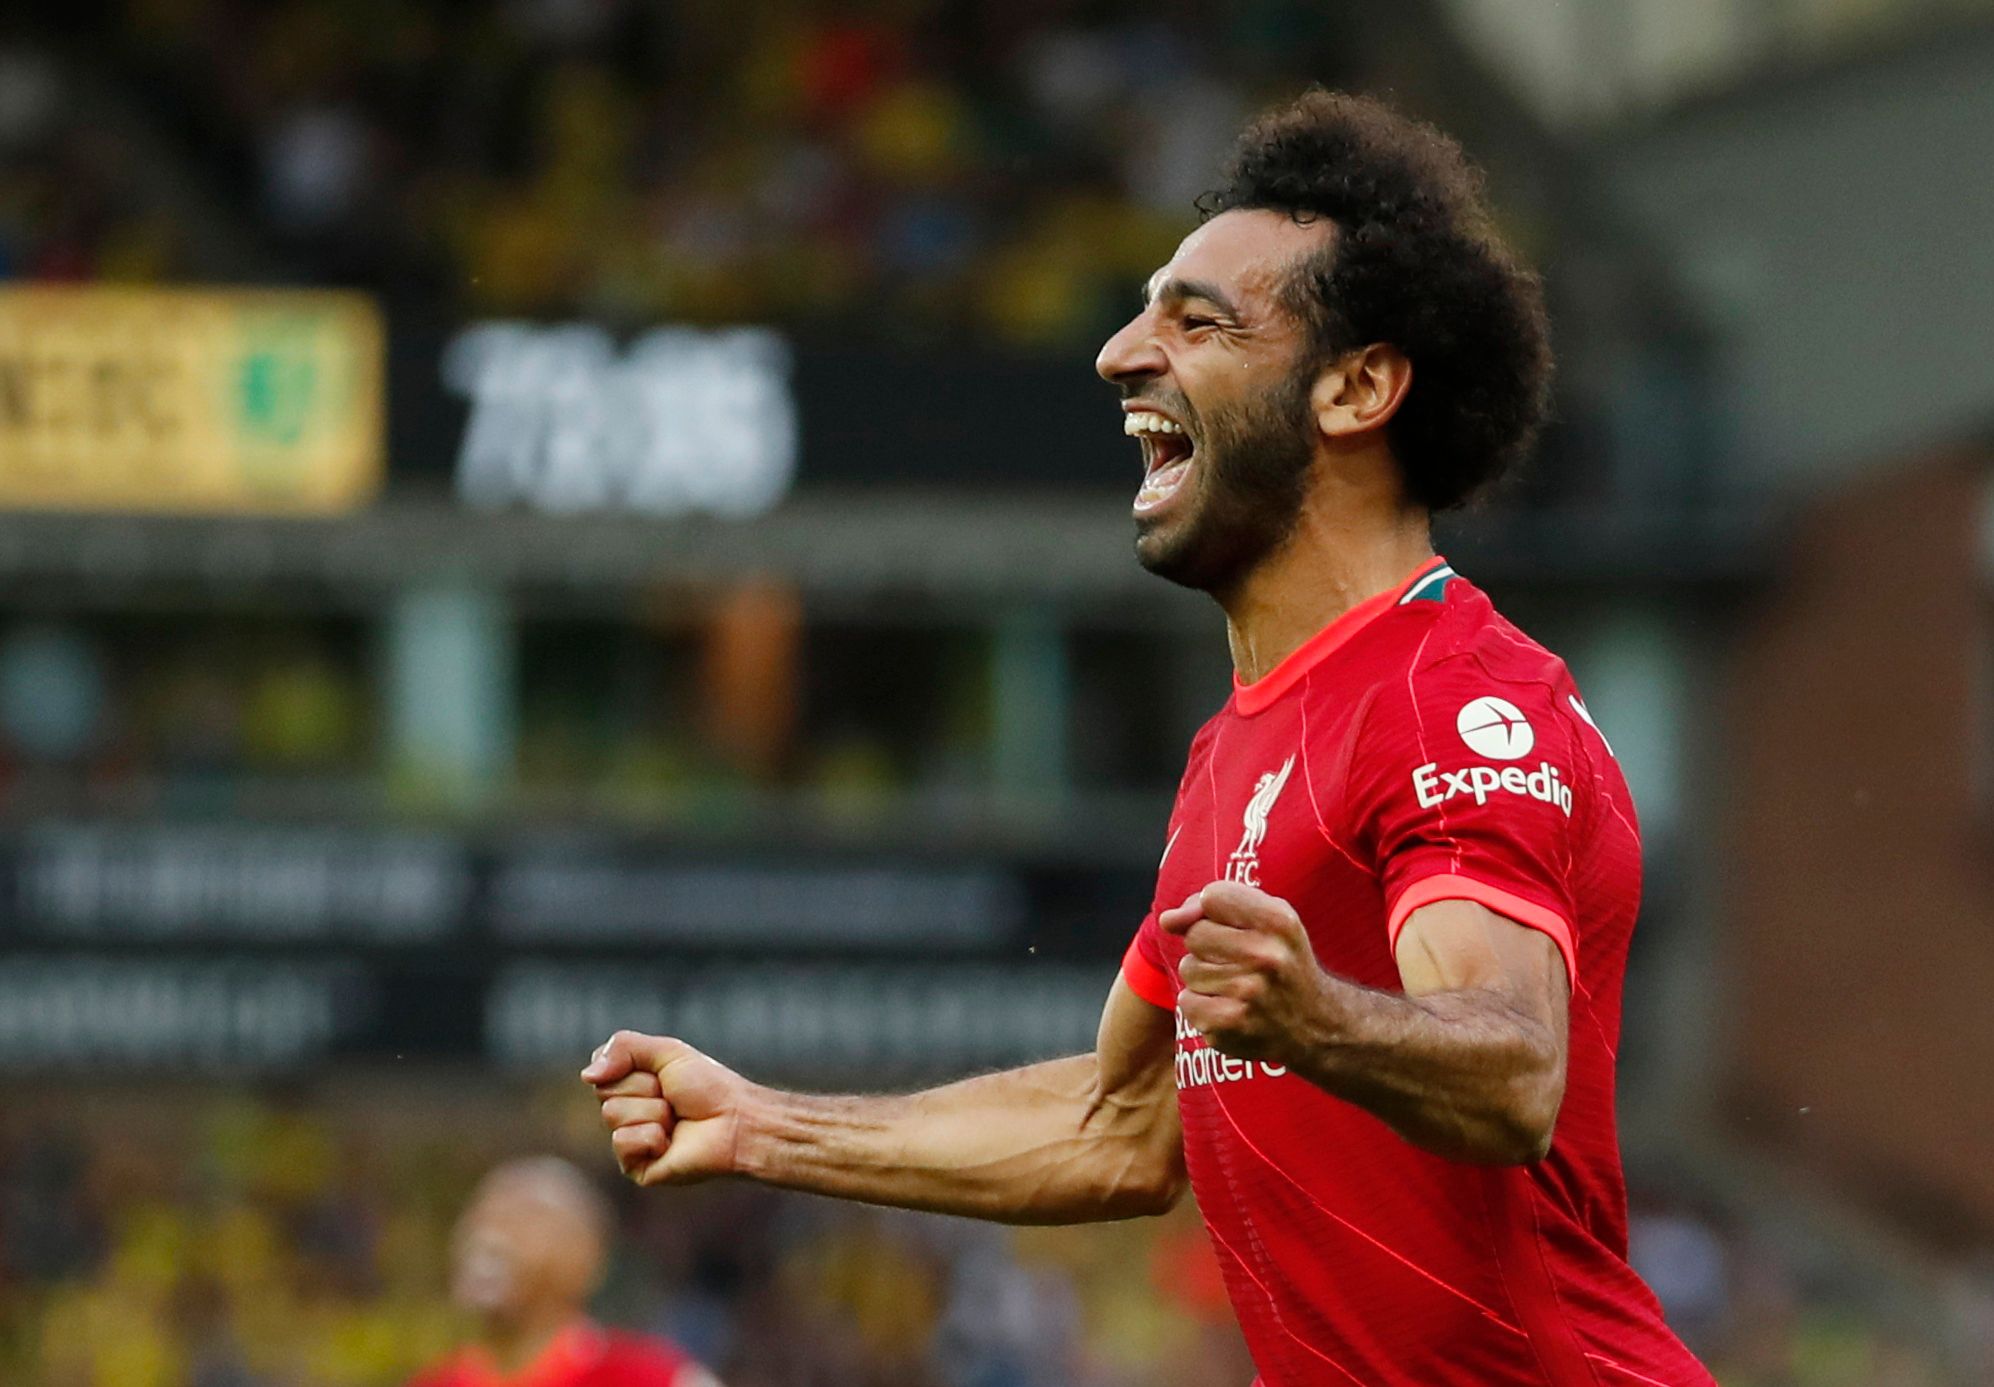 Soccer Football - Premier League - Norwich City v Liverpool - Carrow Road, Norwich, Britain - August 14, 2021 Liverpool's Mohamed Salah  celebrates scoring their third goal Action Images via Reuters/Peter Cziborra EDITORIAL USE ONLY. No use with unauthorized audio, video, data, fixture lists, club/league logos or 'live' services. Online in-match use limited to 75 images, no video emulation. No use in betting, games or single club /league/player publications.  Please contact your account represen